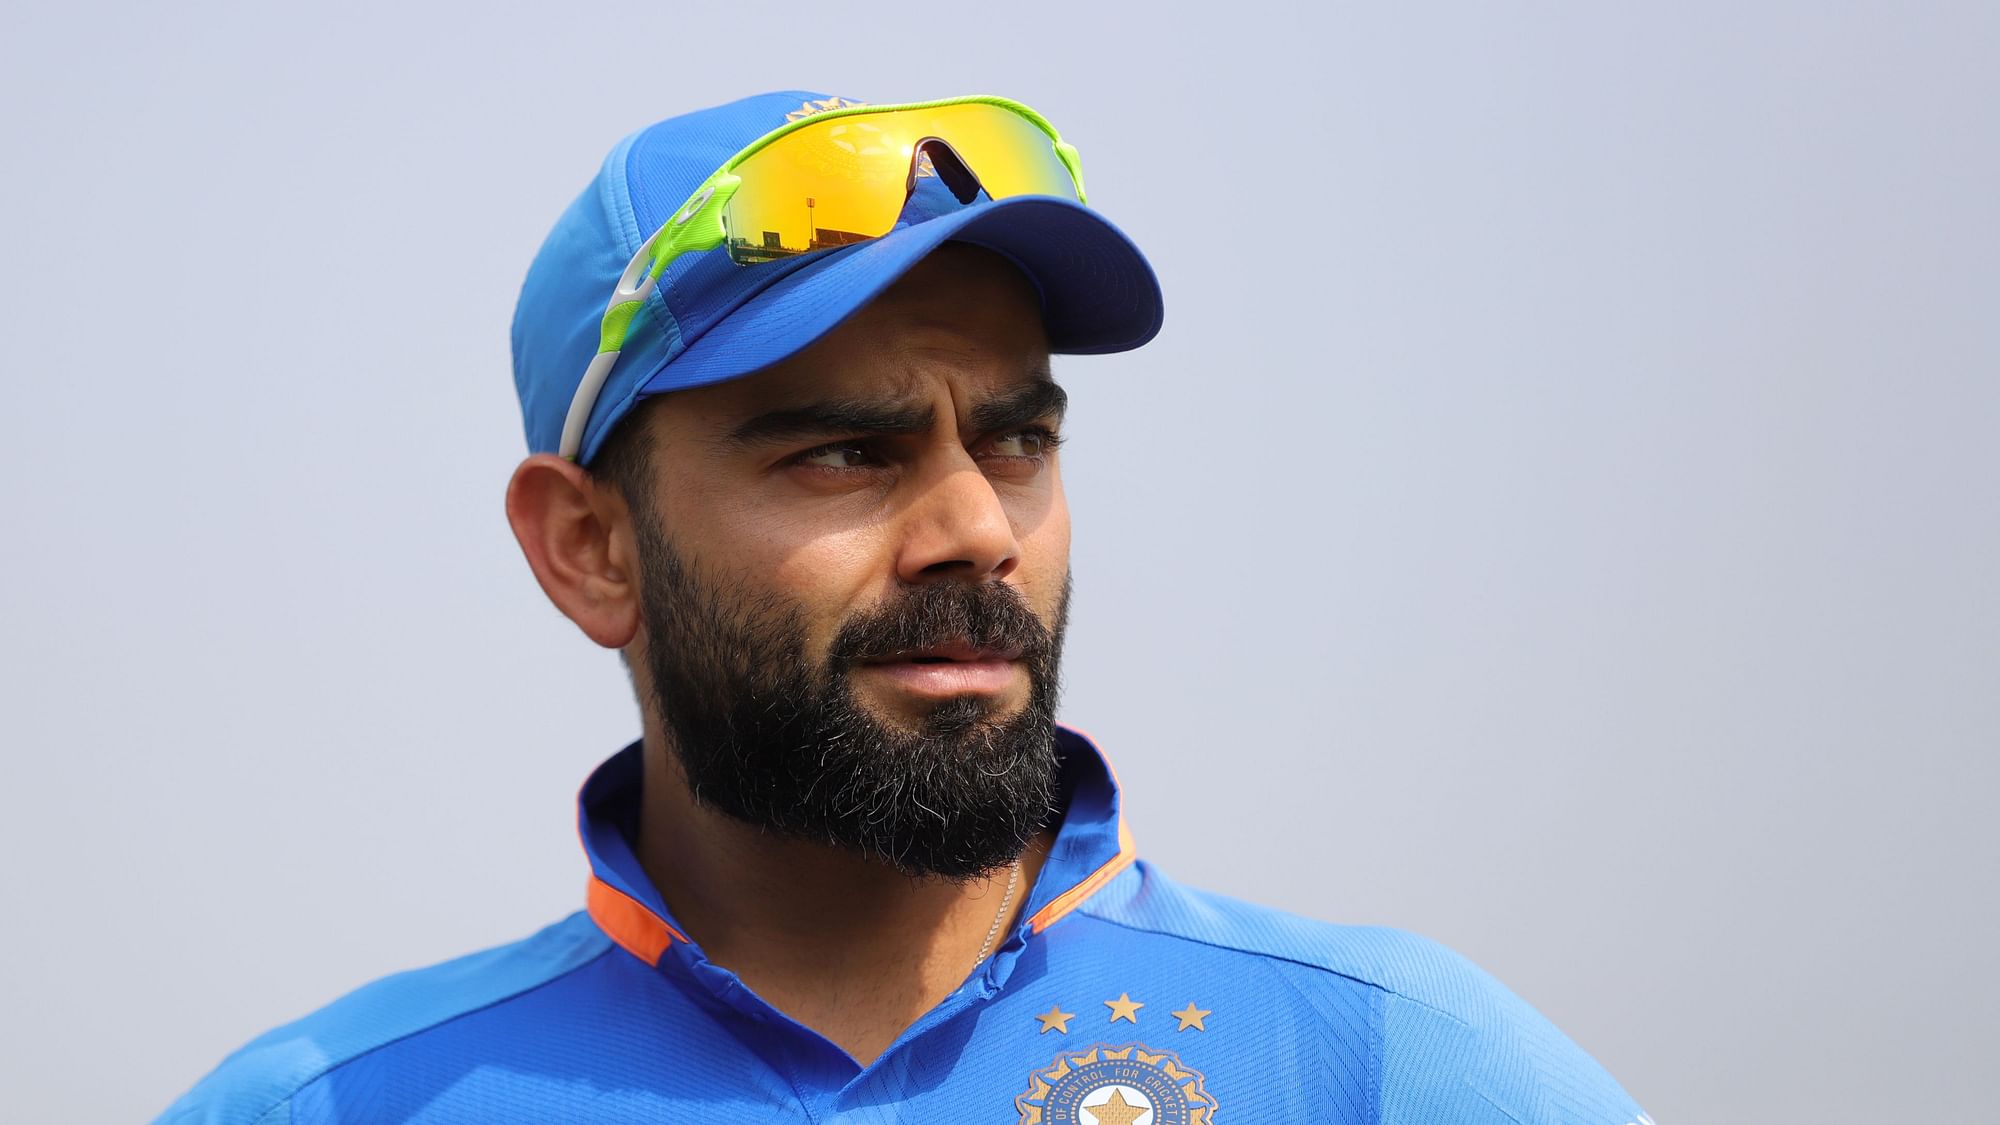 India captain Virat Kohli was on Wednesday, 15 January awarded with the ICC ‘Spirit of Cricket’ award for his gesture of trying to stop the fans from booing Steve Smith during a World Cup match.